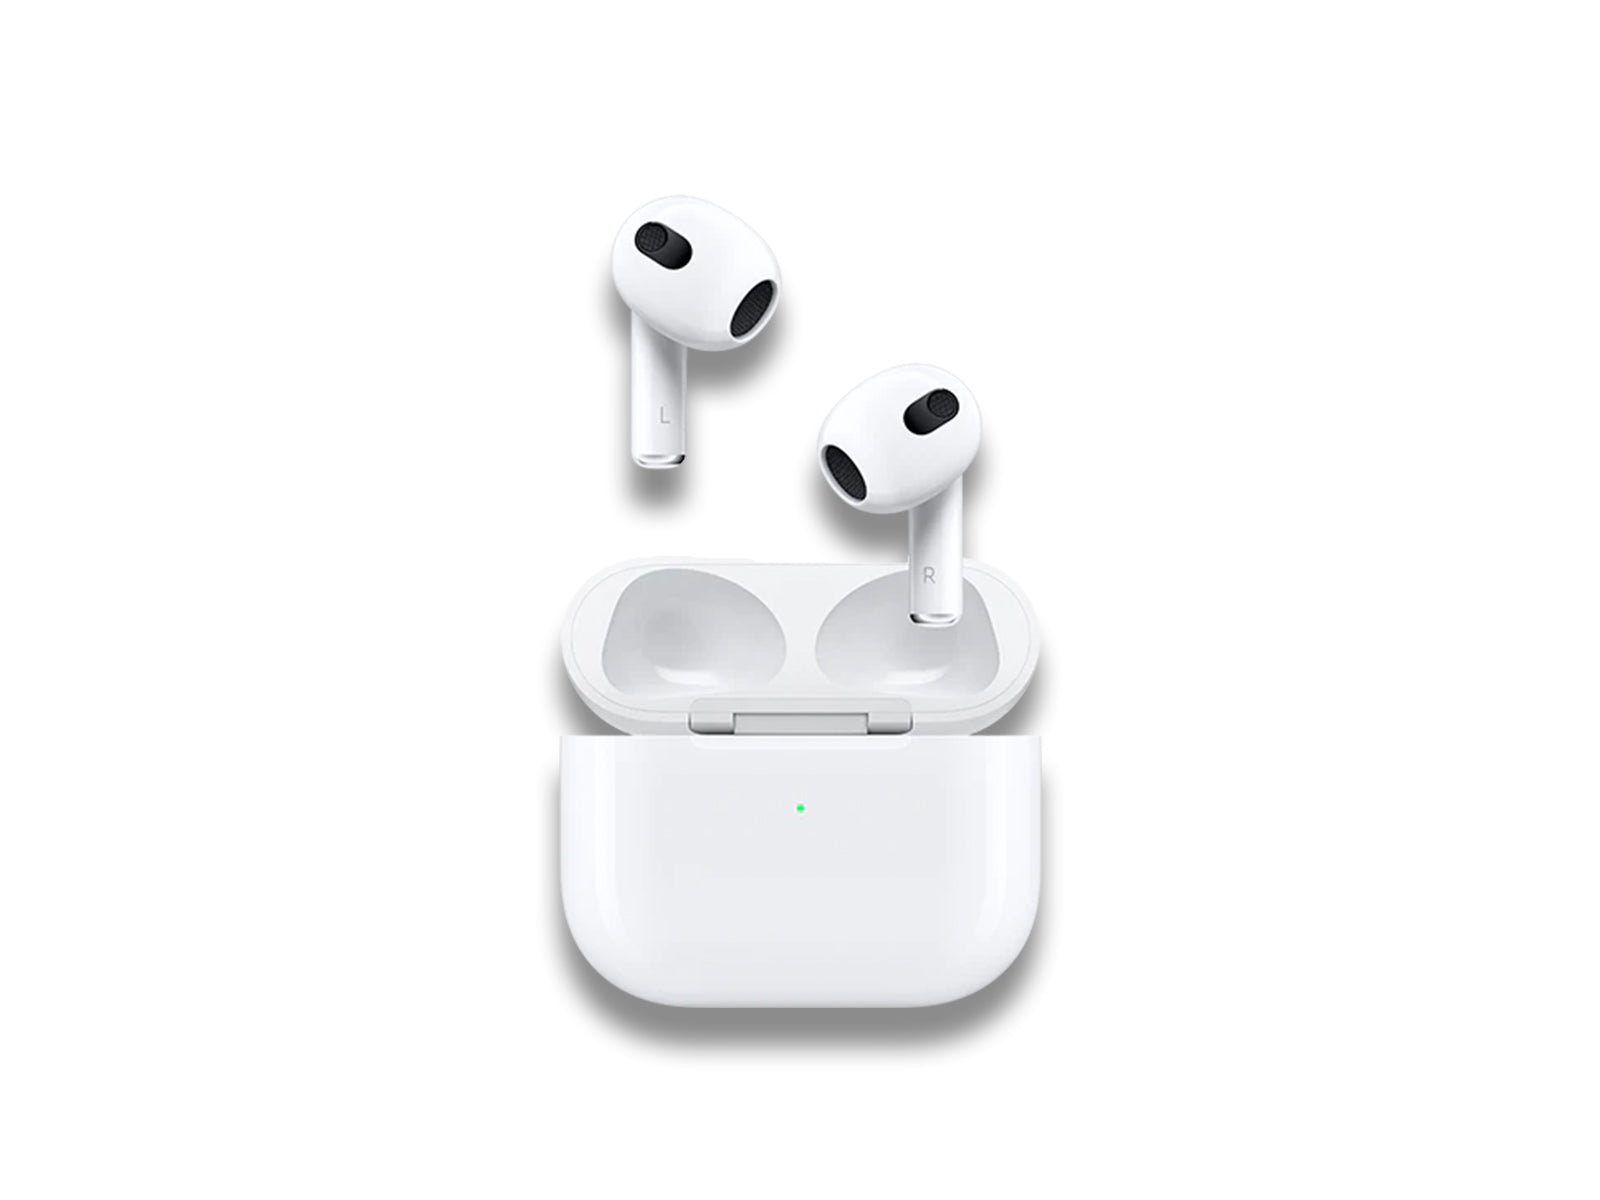 Image shows 3rd Gen AirPods with charging case on white background